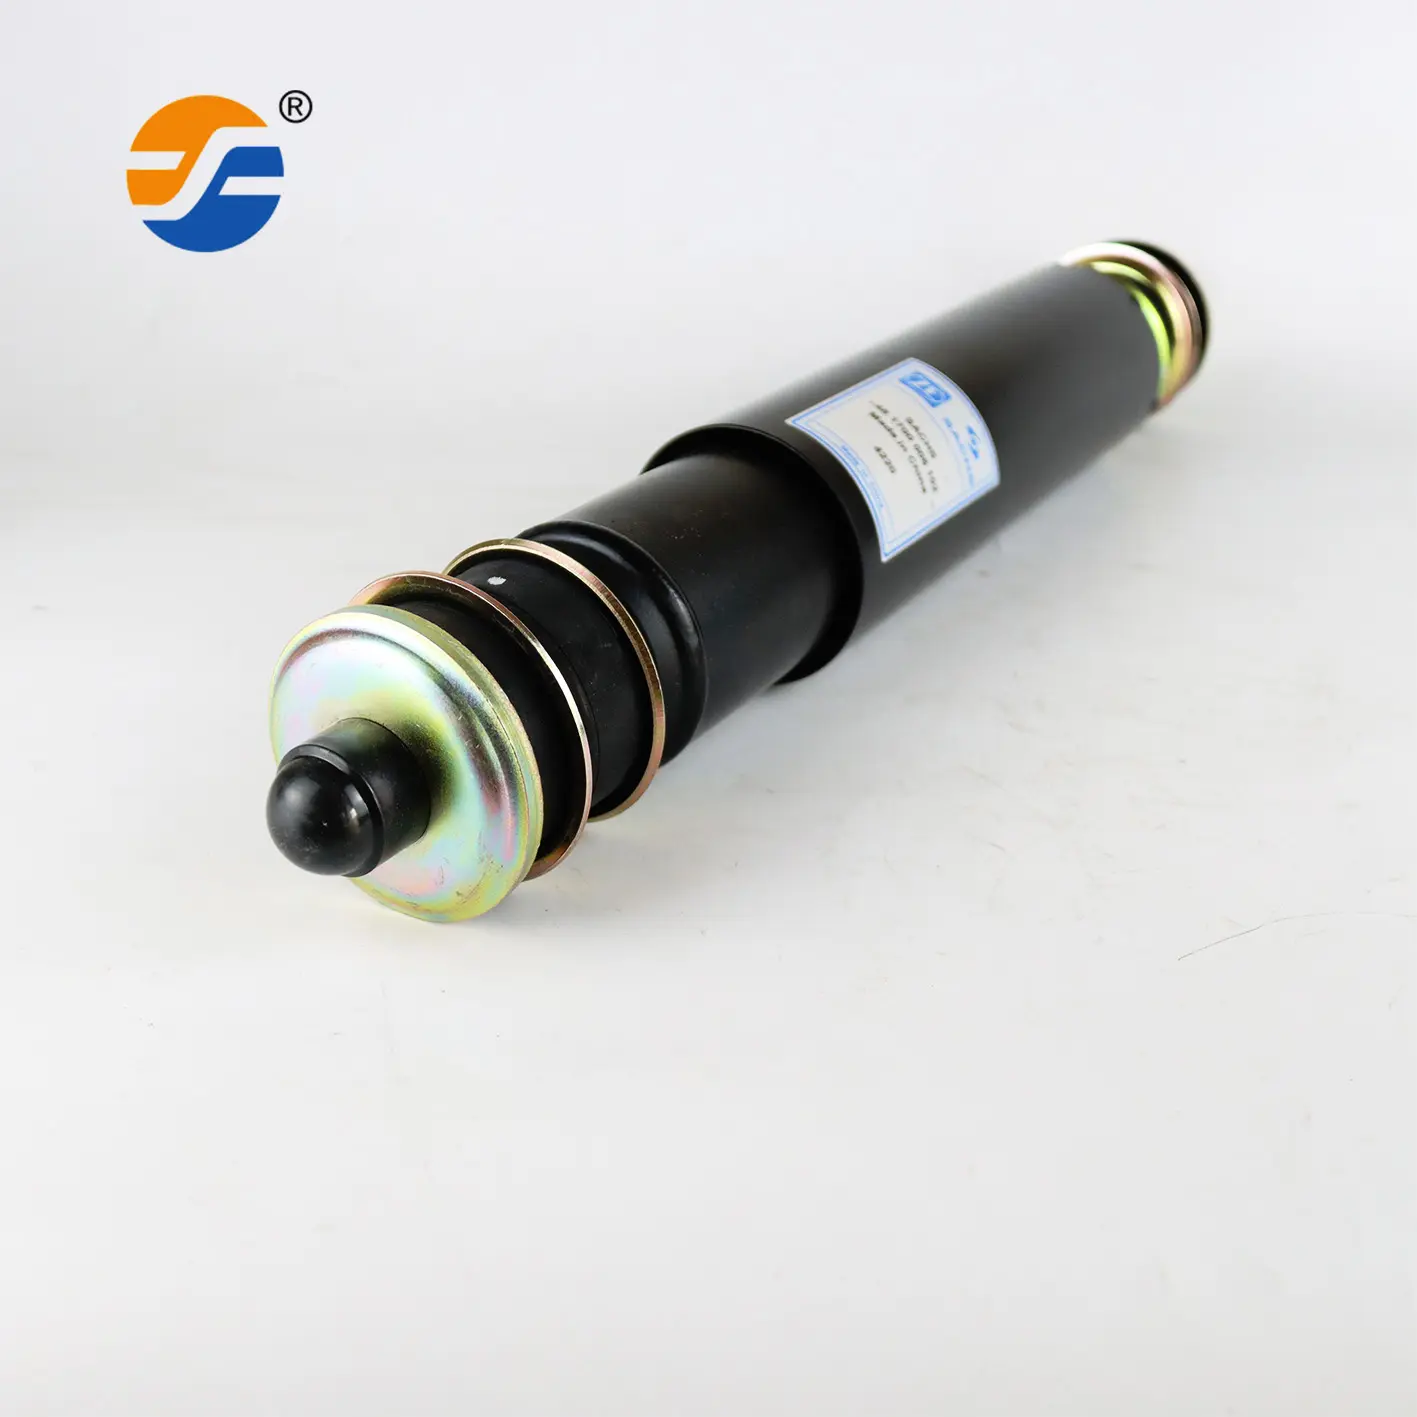 Shock absorber assembly up and down screw 481700006102 Original High quality low price bus parts 229003085